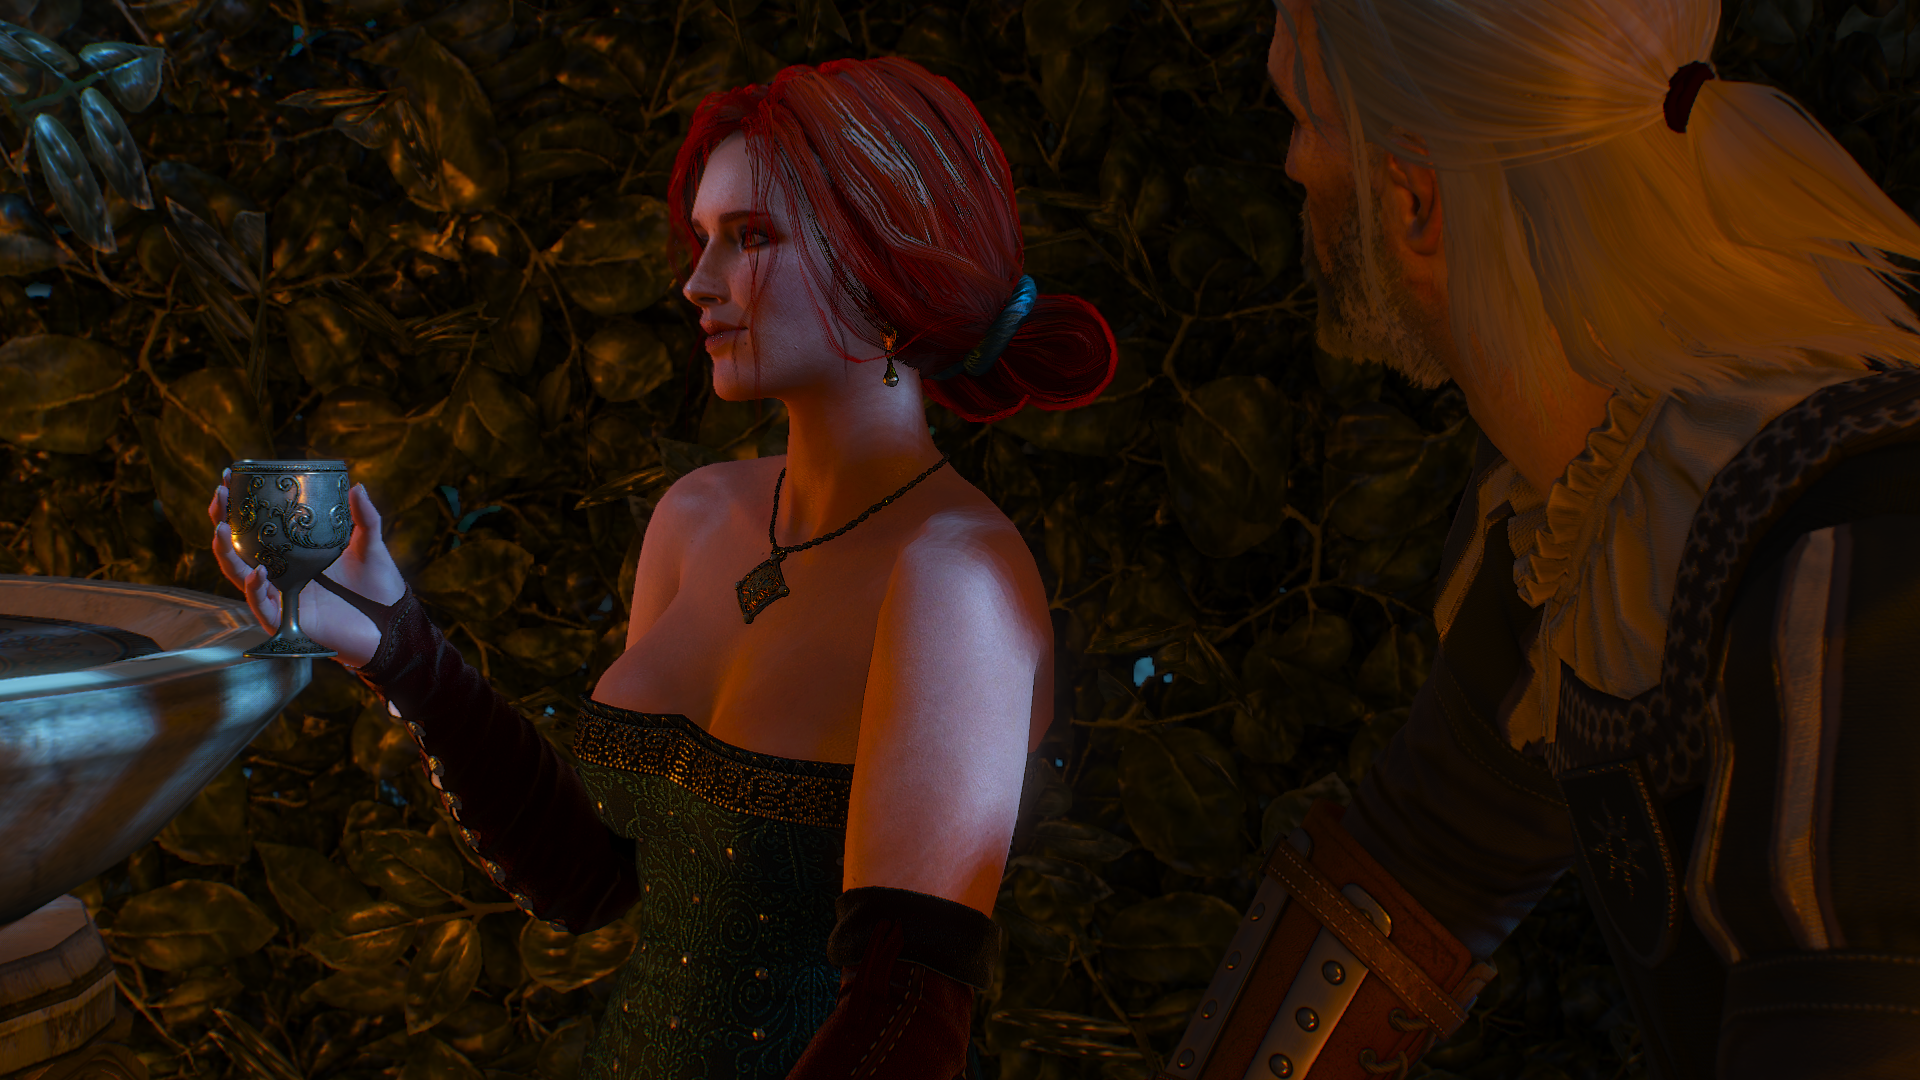 General 1920x1080 The Witcher 3: Wild Hunt Triss Merigold Geralt of Rivia The Witcher women redhead video games video game characters